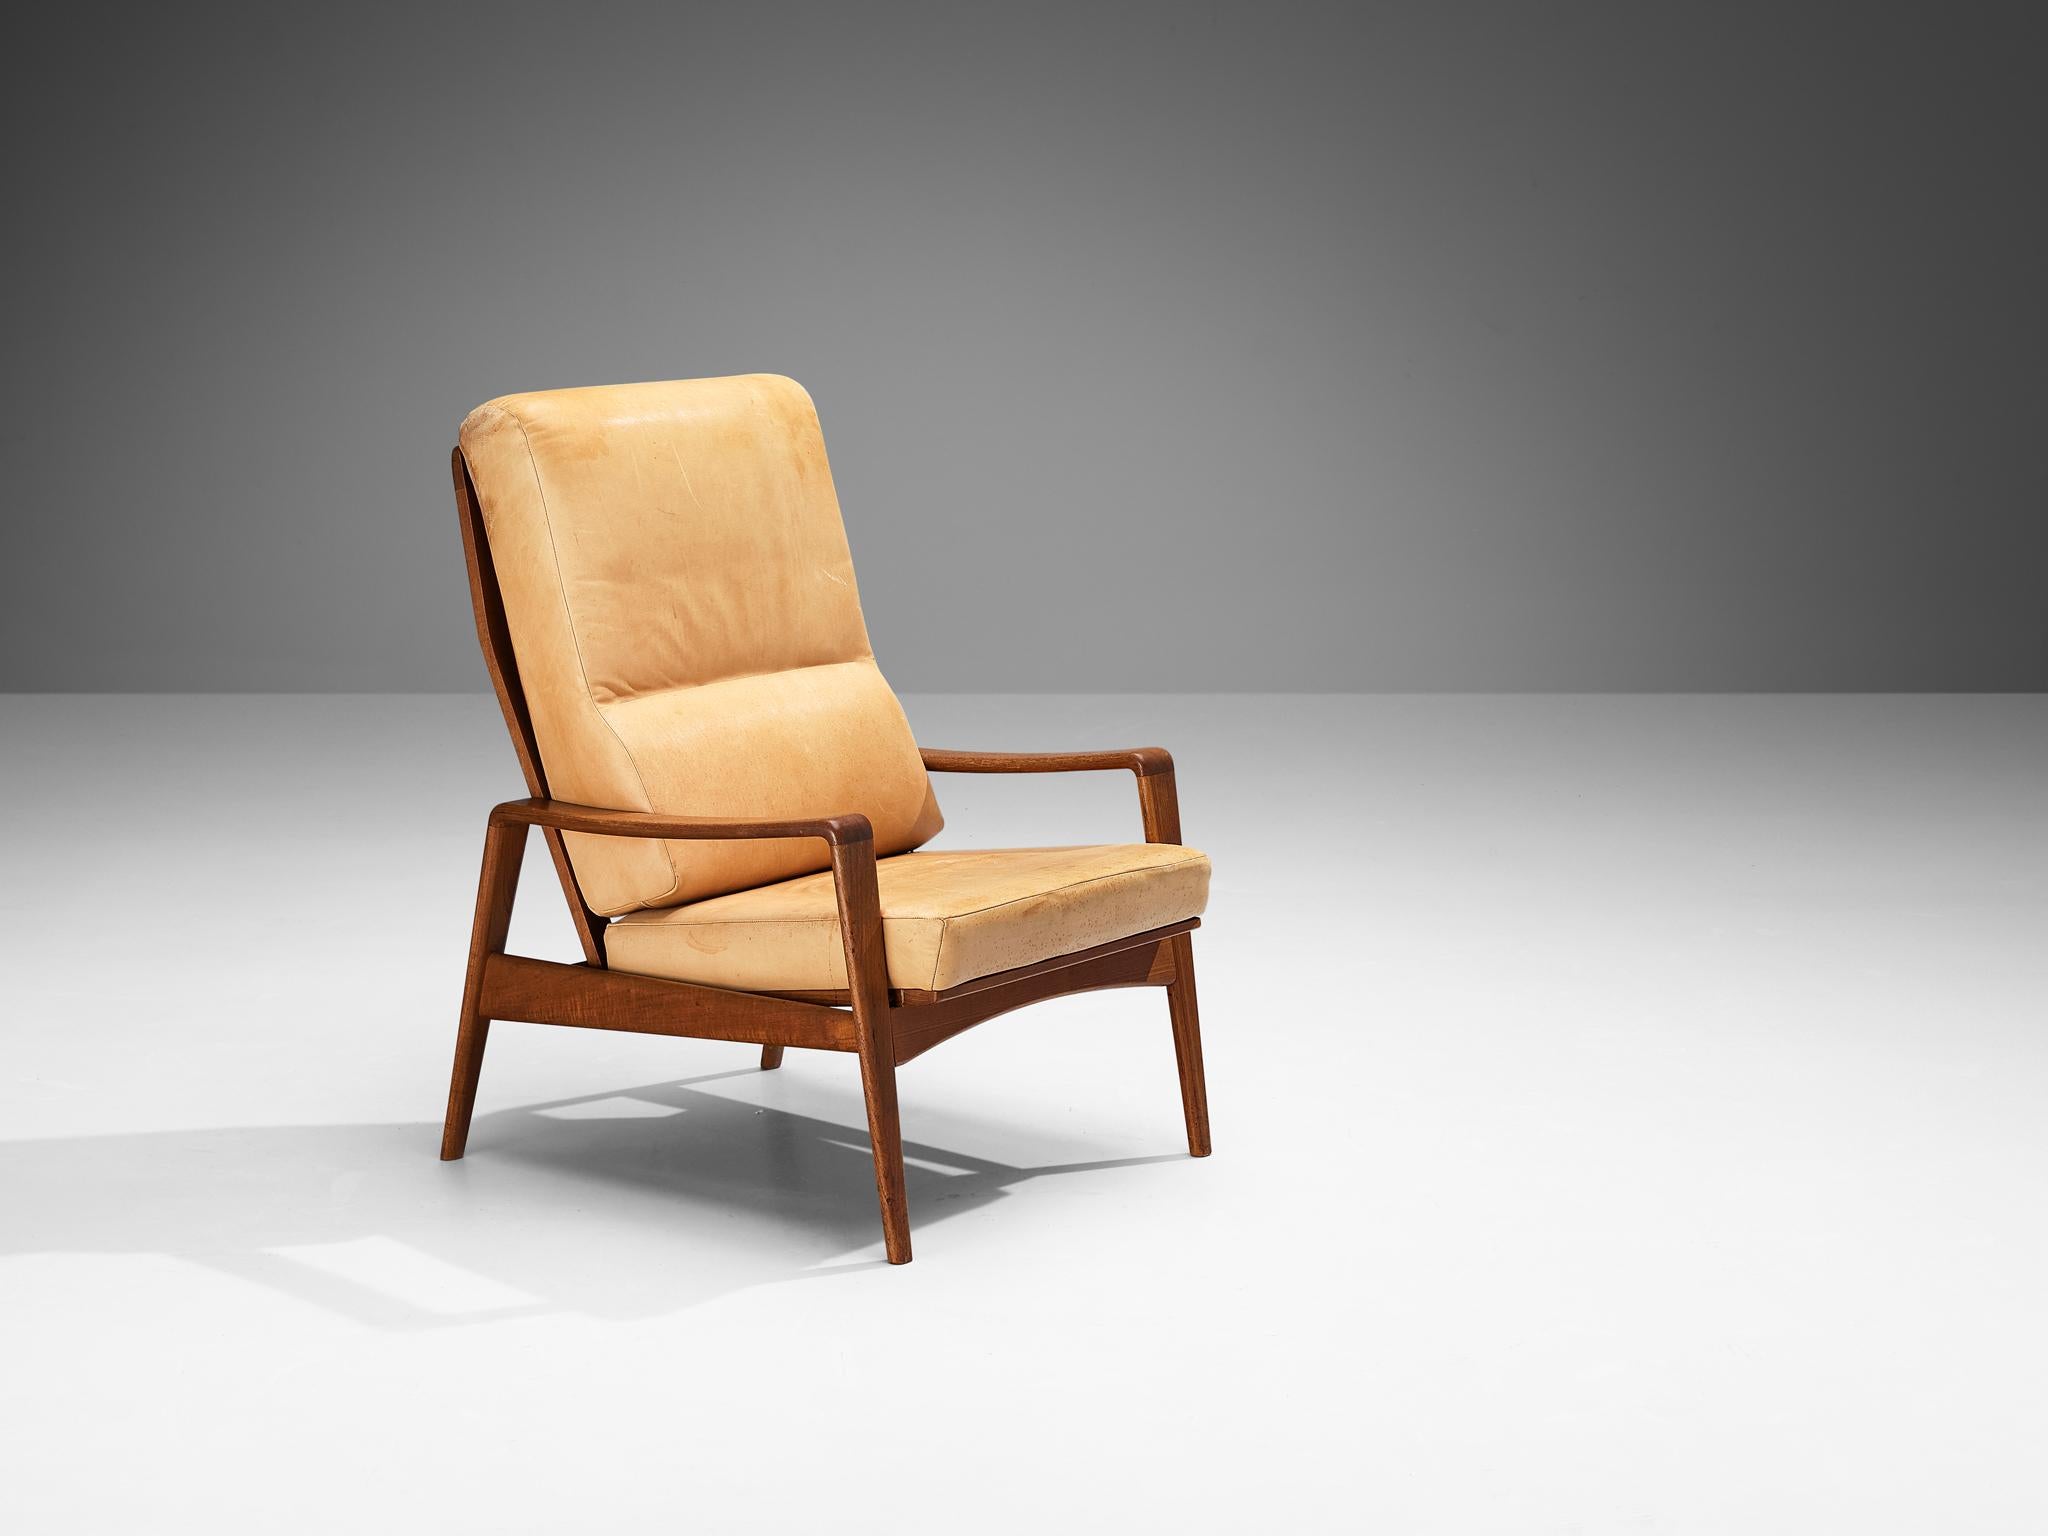 European Arne Wahl Iversen Armchair with Ottoman in Teak and Camel Leather For Sale